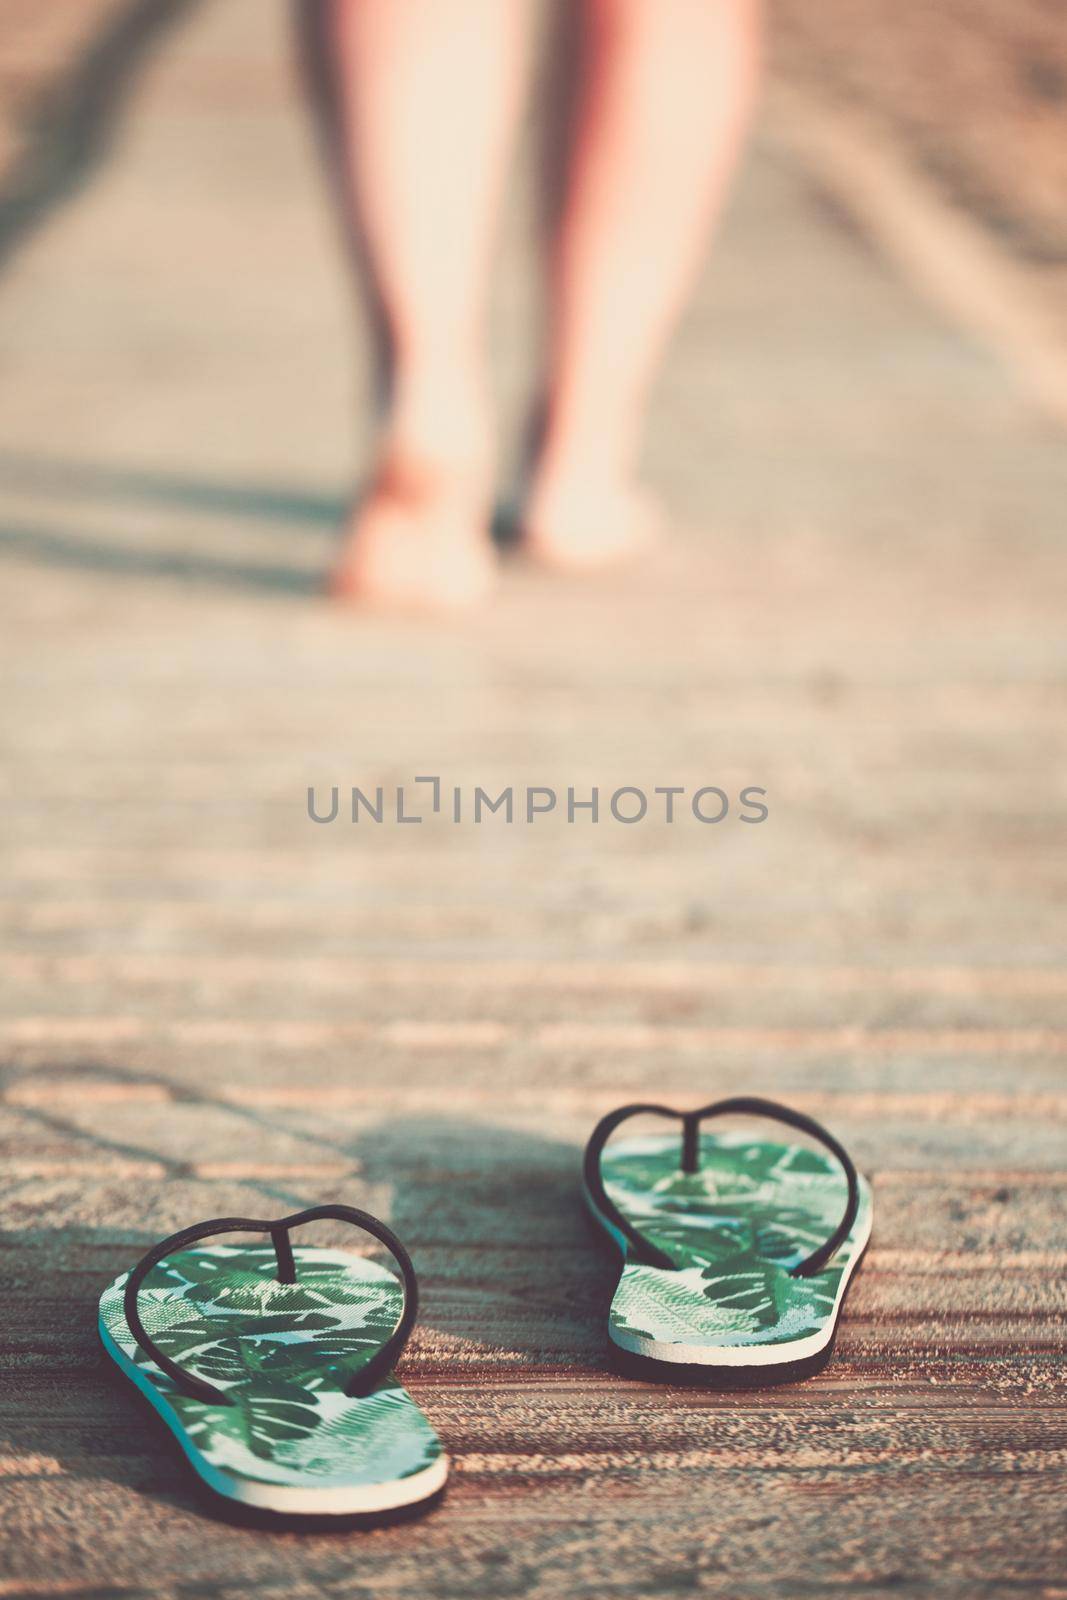 Bare feet of a girl walking on a wooden floor on the seashore. by clusterx